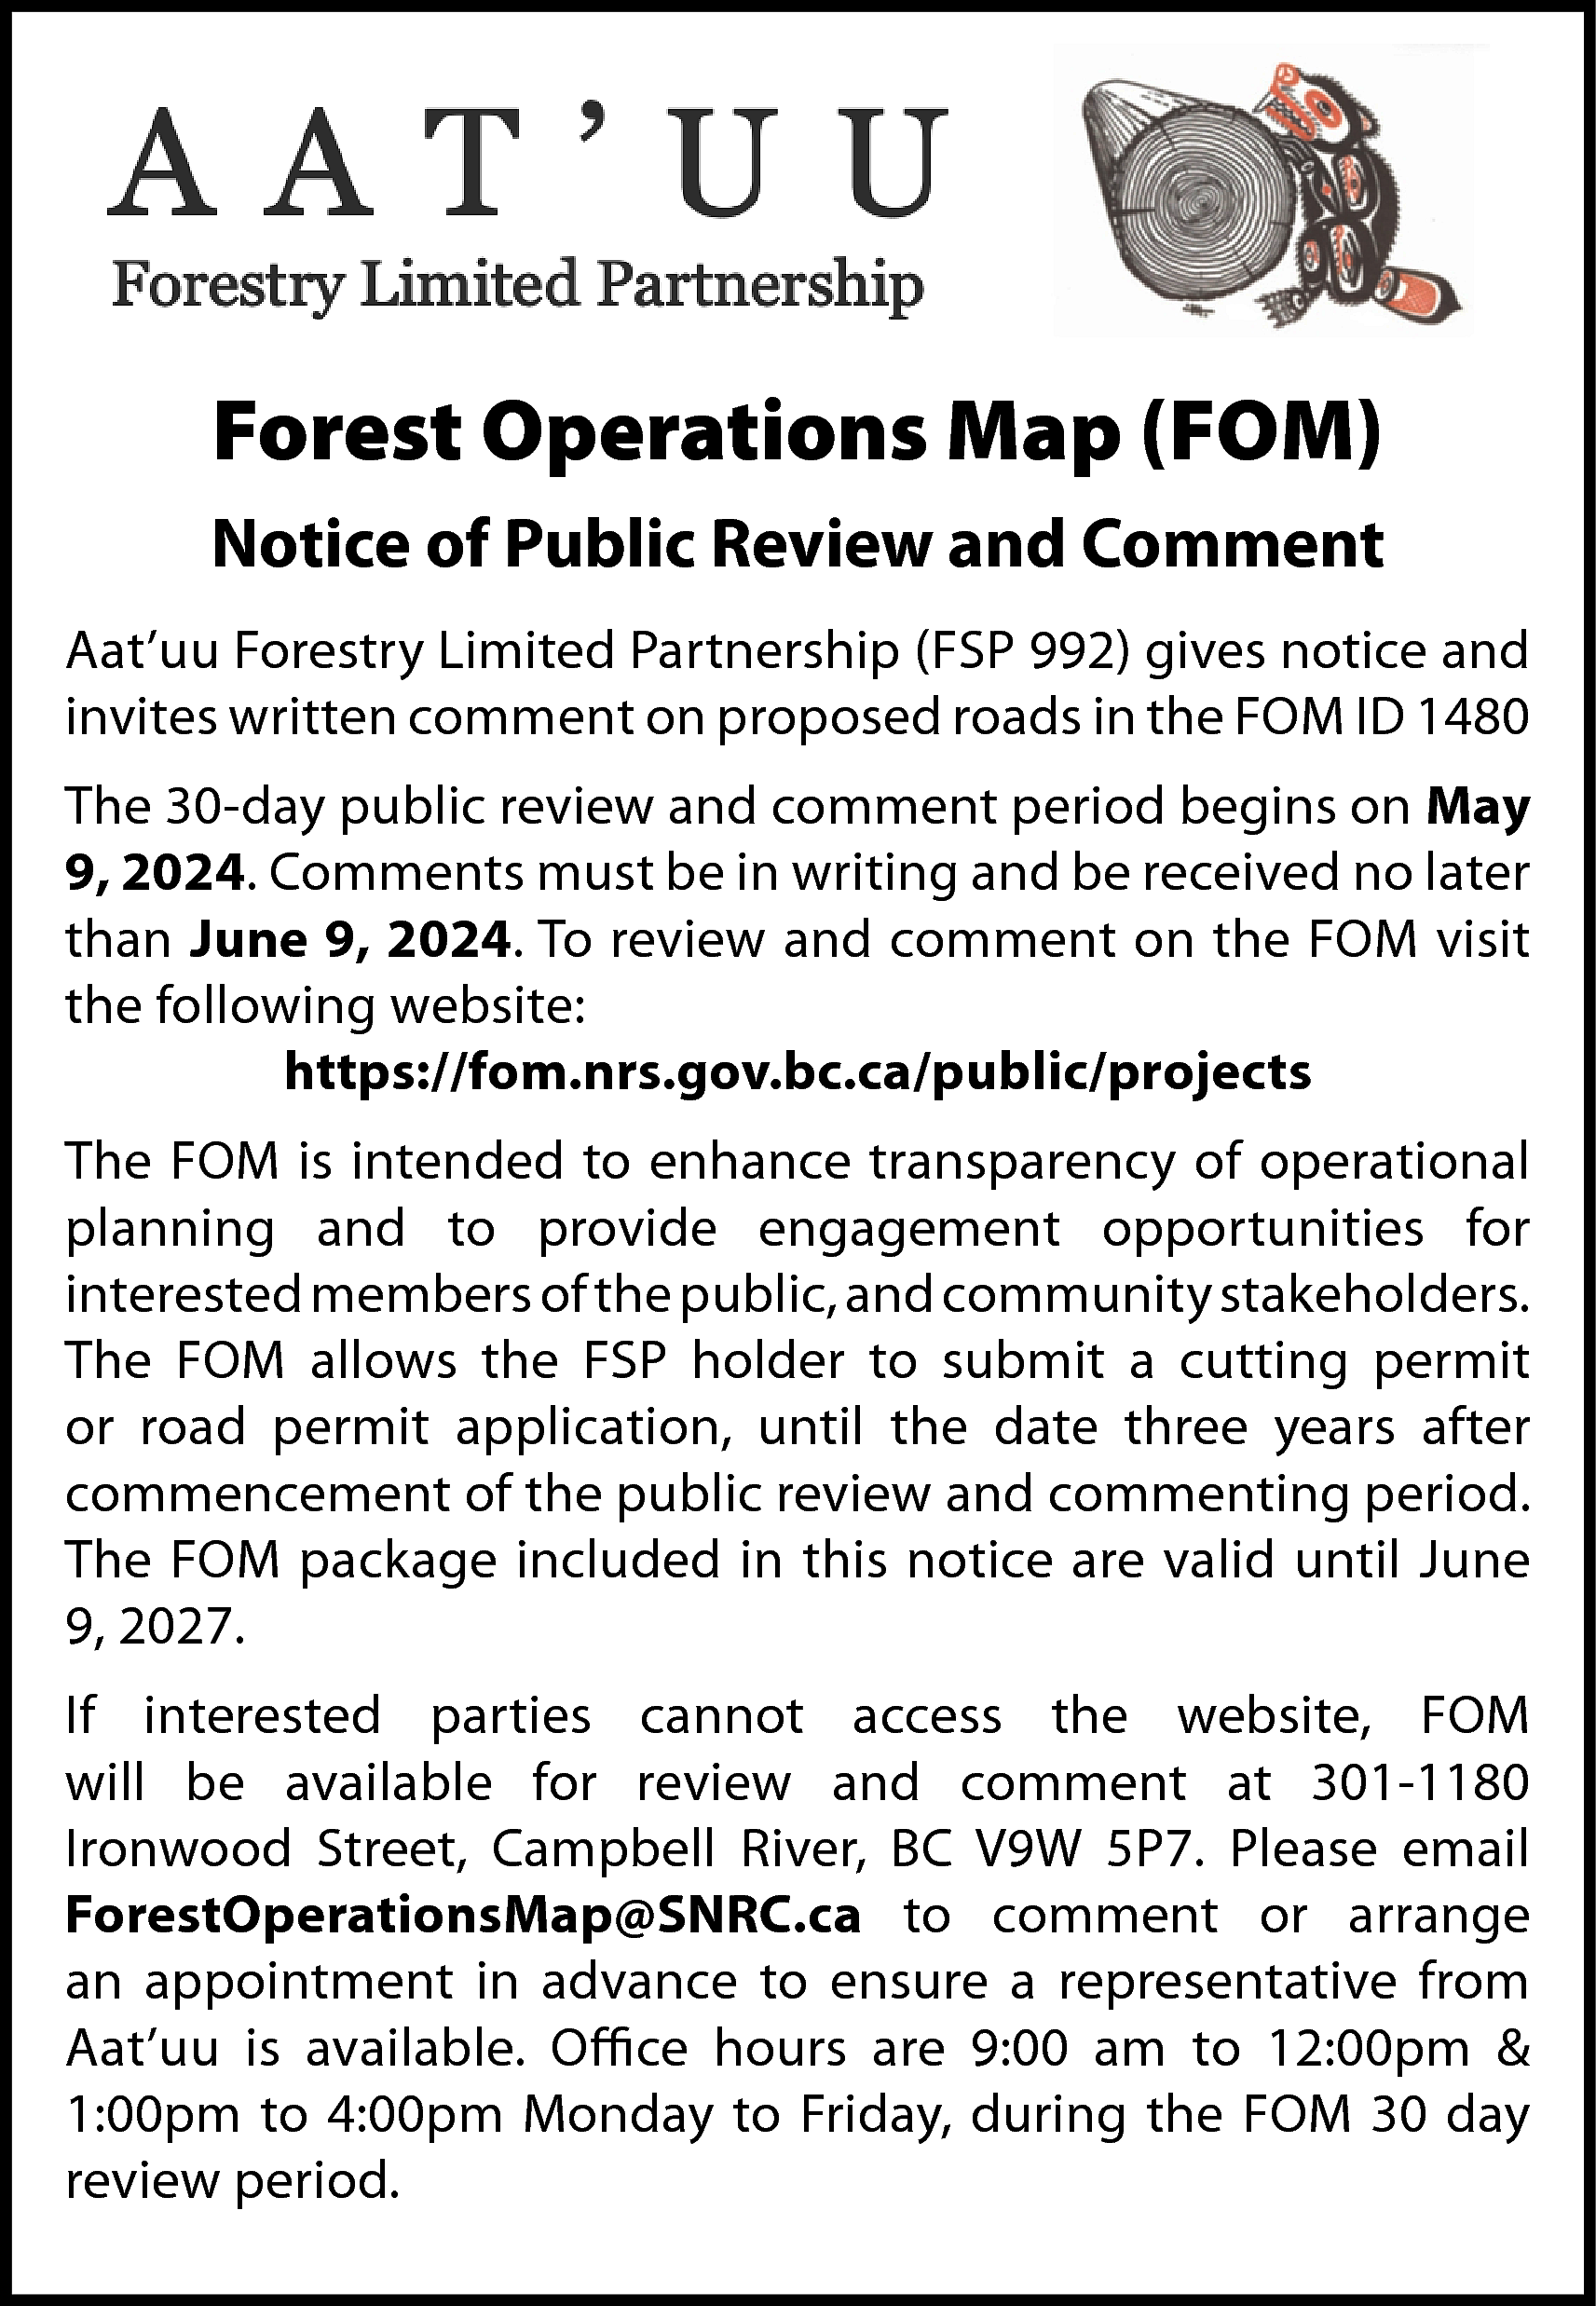 Forest Operations Map (FOM) <br>Notice  Forest Operations Map (FOM)  Notice of Public Review and Comment  Aat’uu Forestry Limited Partnership (FSP 992) gives notice and  invites written comment on proposed roads in the FOM ID 1480  The 30-day public review and comment period begins on May  9, 2024. Comments must be in writing and be received no later  than June 9, 2024. To review and comment on the FOM visit  the following website:  https://fom.nrs.gov.bc.ca/public/projects  The FOM is intended to enhance transparency of operational  planning and to provide engagement opportunities for  interested members of the public, and community stakeholders.  The FOM allows the FSP holder to submit a cutting permit  or road permit application, until the date three years after  commencement of the public review and commenting period.  The FOM package included in this notice are valid until June  9, 2027.  If interested parties cannot access the website, FOM  will be available for review and comment at 301-1180  Ironwood Street, Campbell River, BC V9W 5P7. Please email  ForestOperationsMap@SNRC.ca to comment or arrange  an appointment in advance to ensure a representative from  Aat’uu is available. Office hours are 9:00 am to 12:00pm &  1:00pm to 4:00pm Monday to Friday, during the FOM 30 day  review period.    